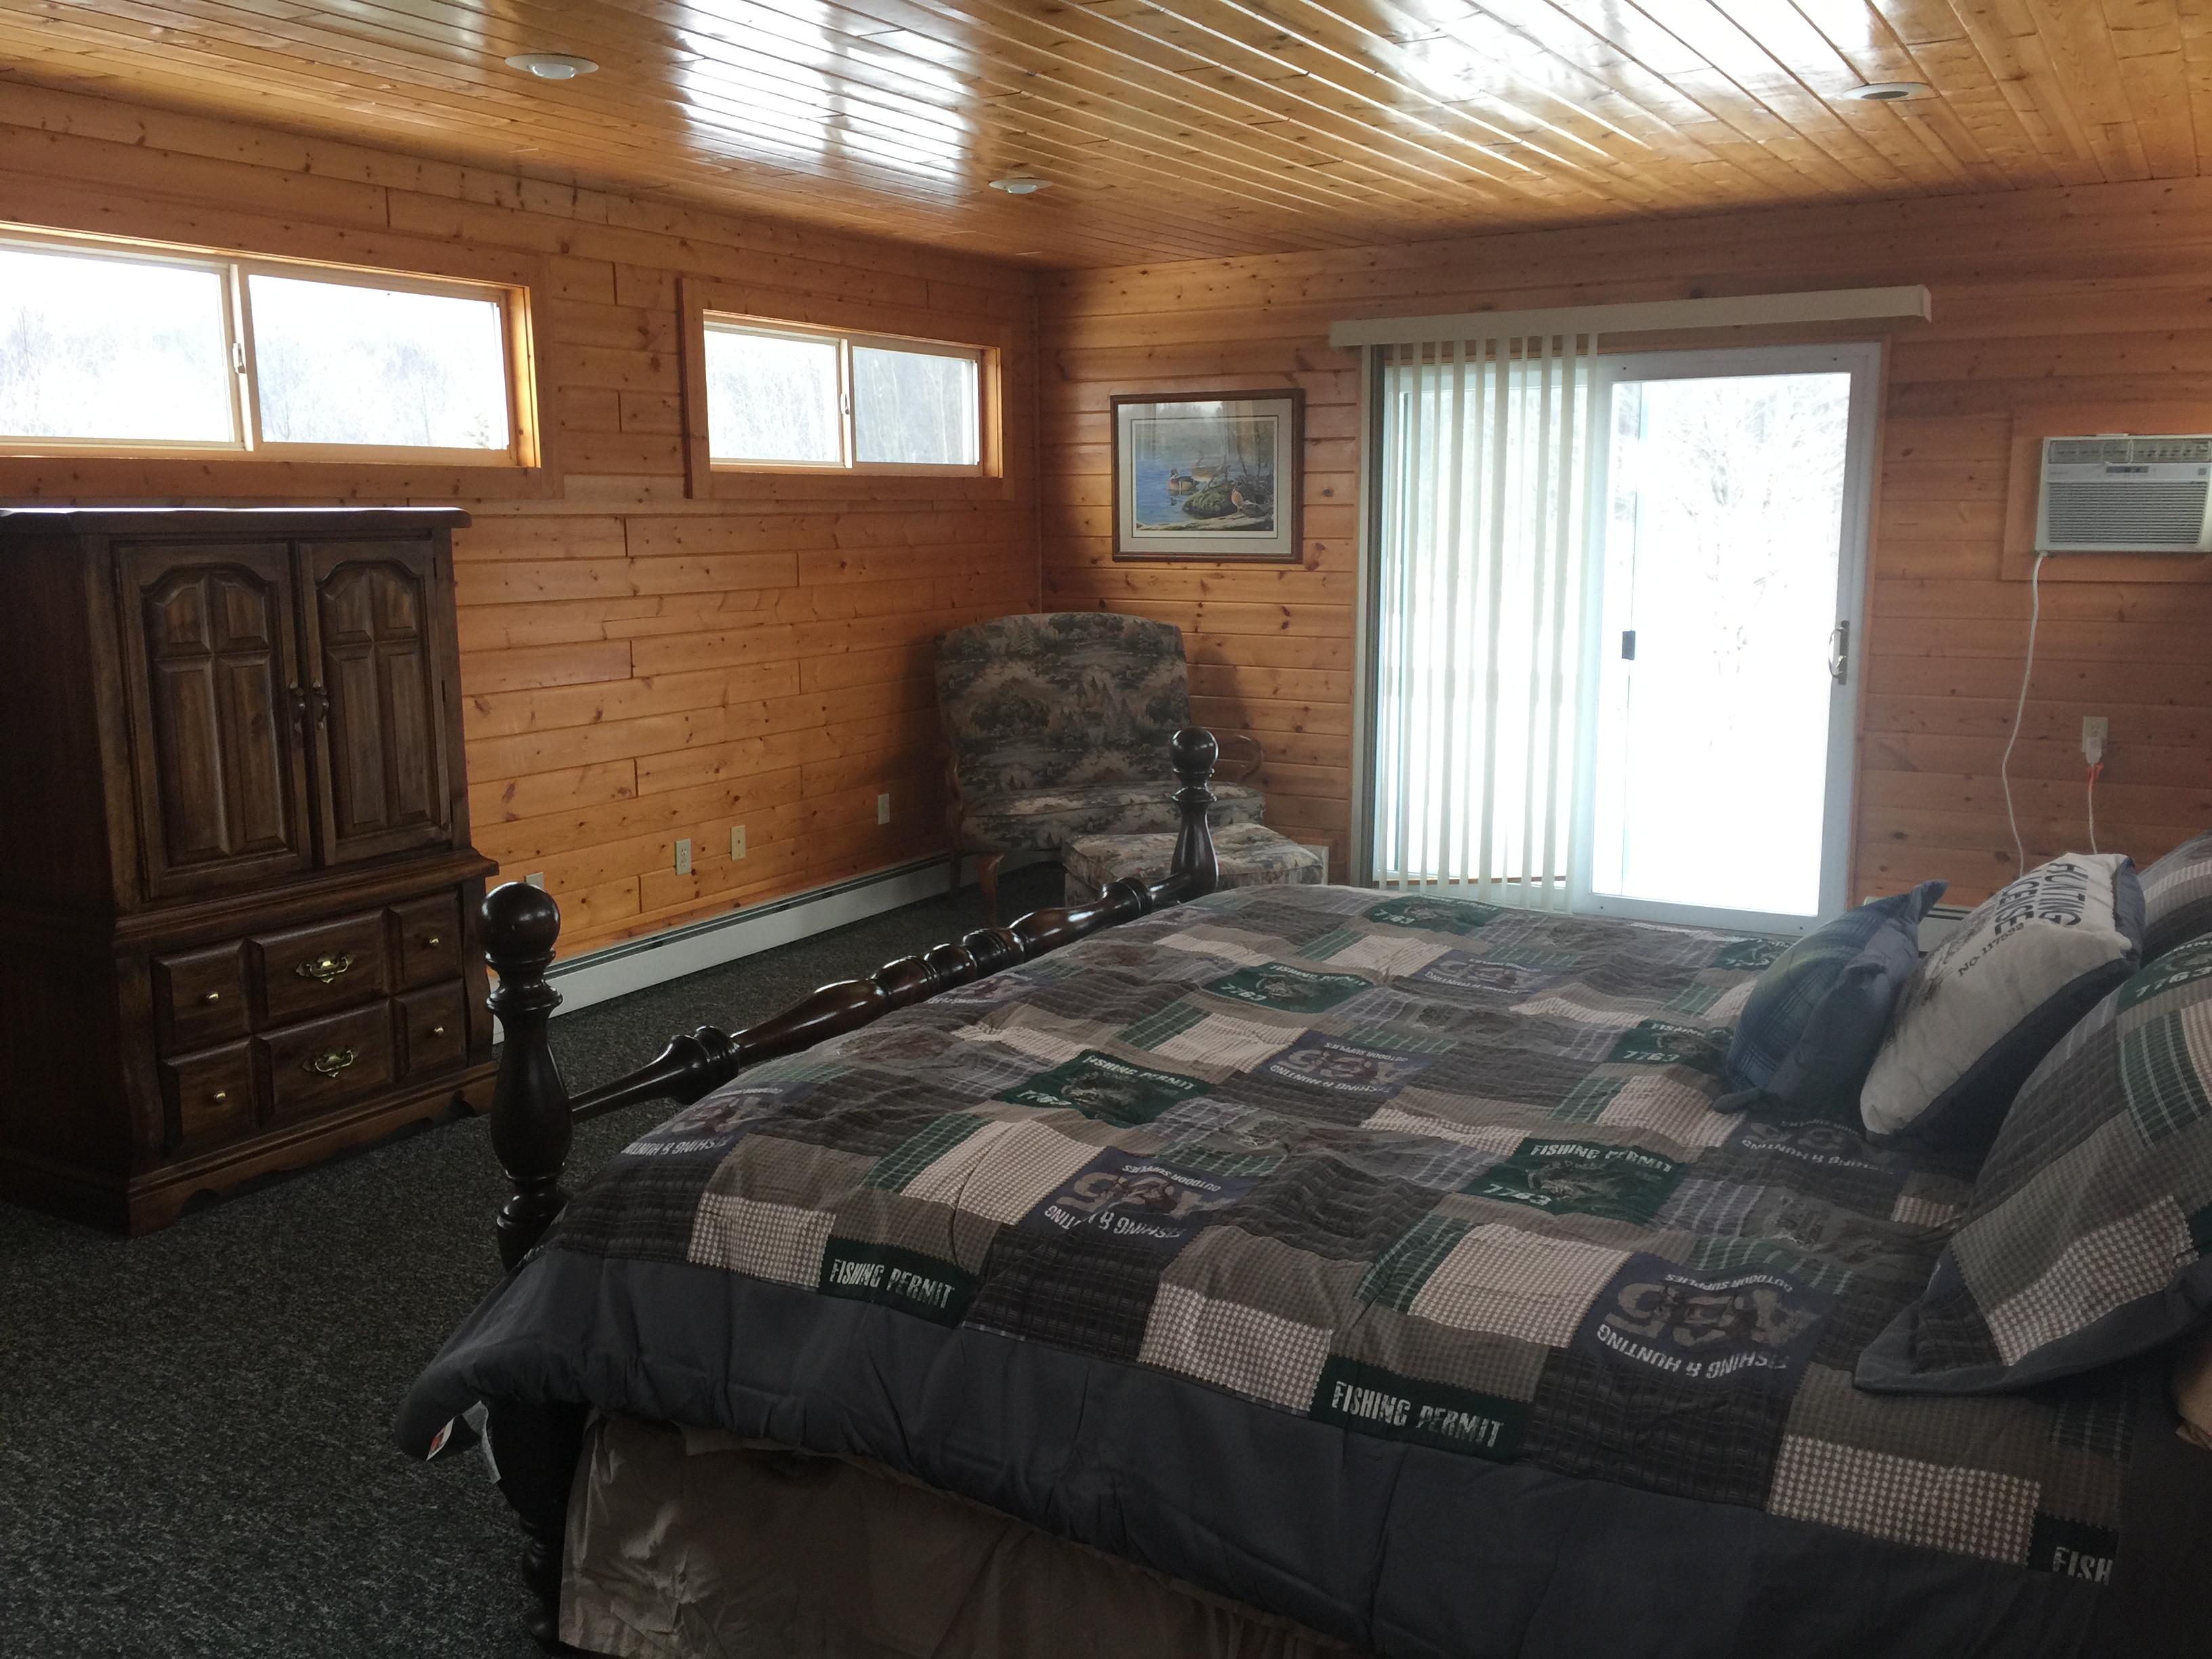 Third floor master bedroom at Torch Lake Lodge. Bedroom includes private deck overlooking trees and fire pit.